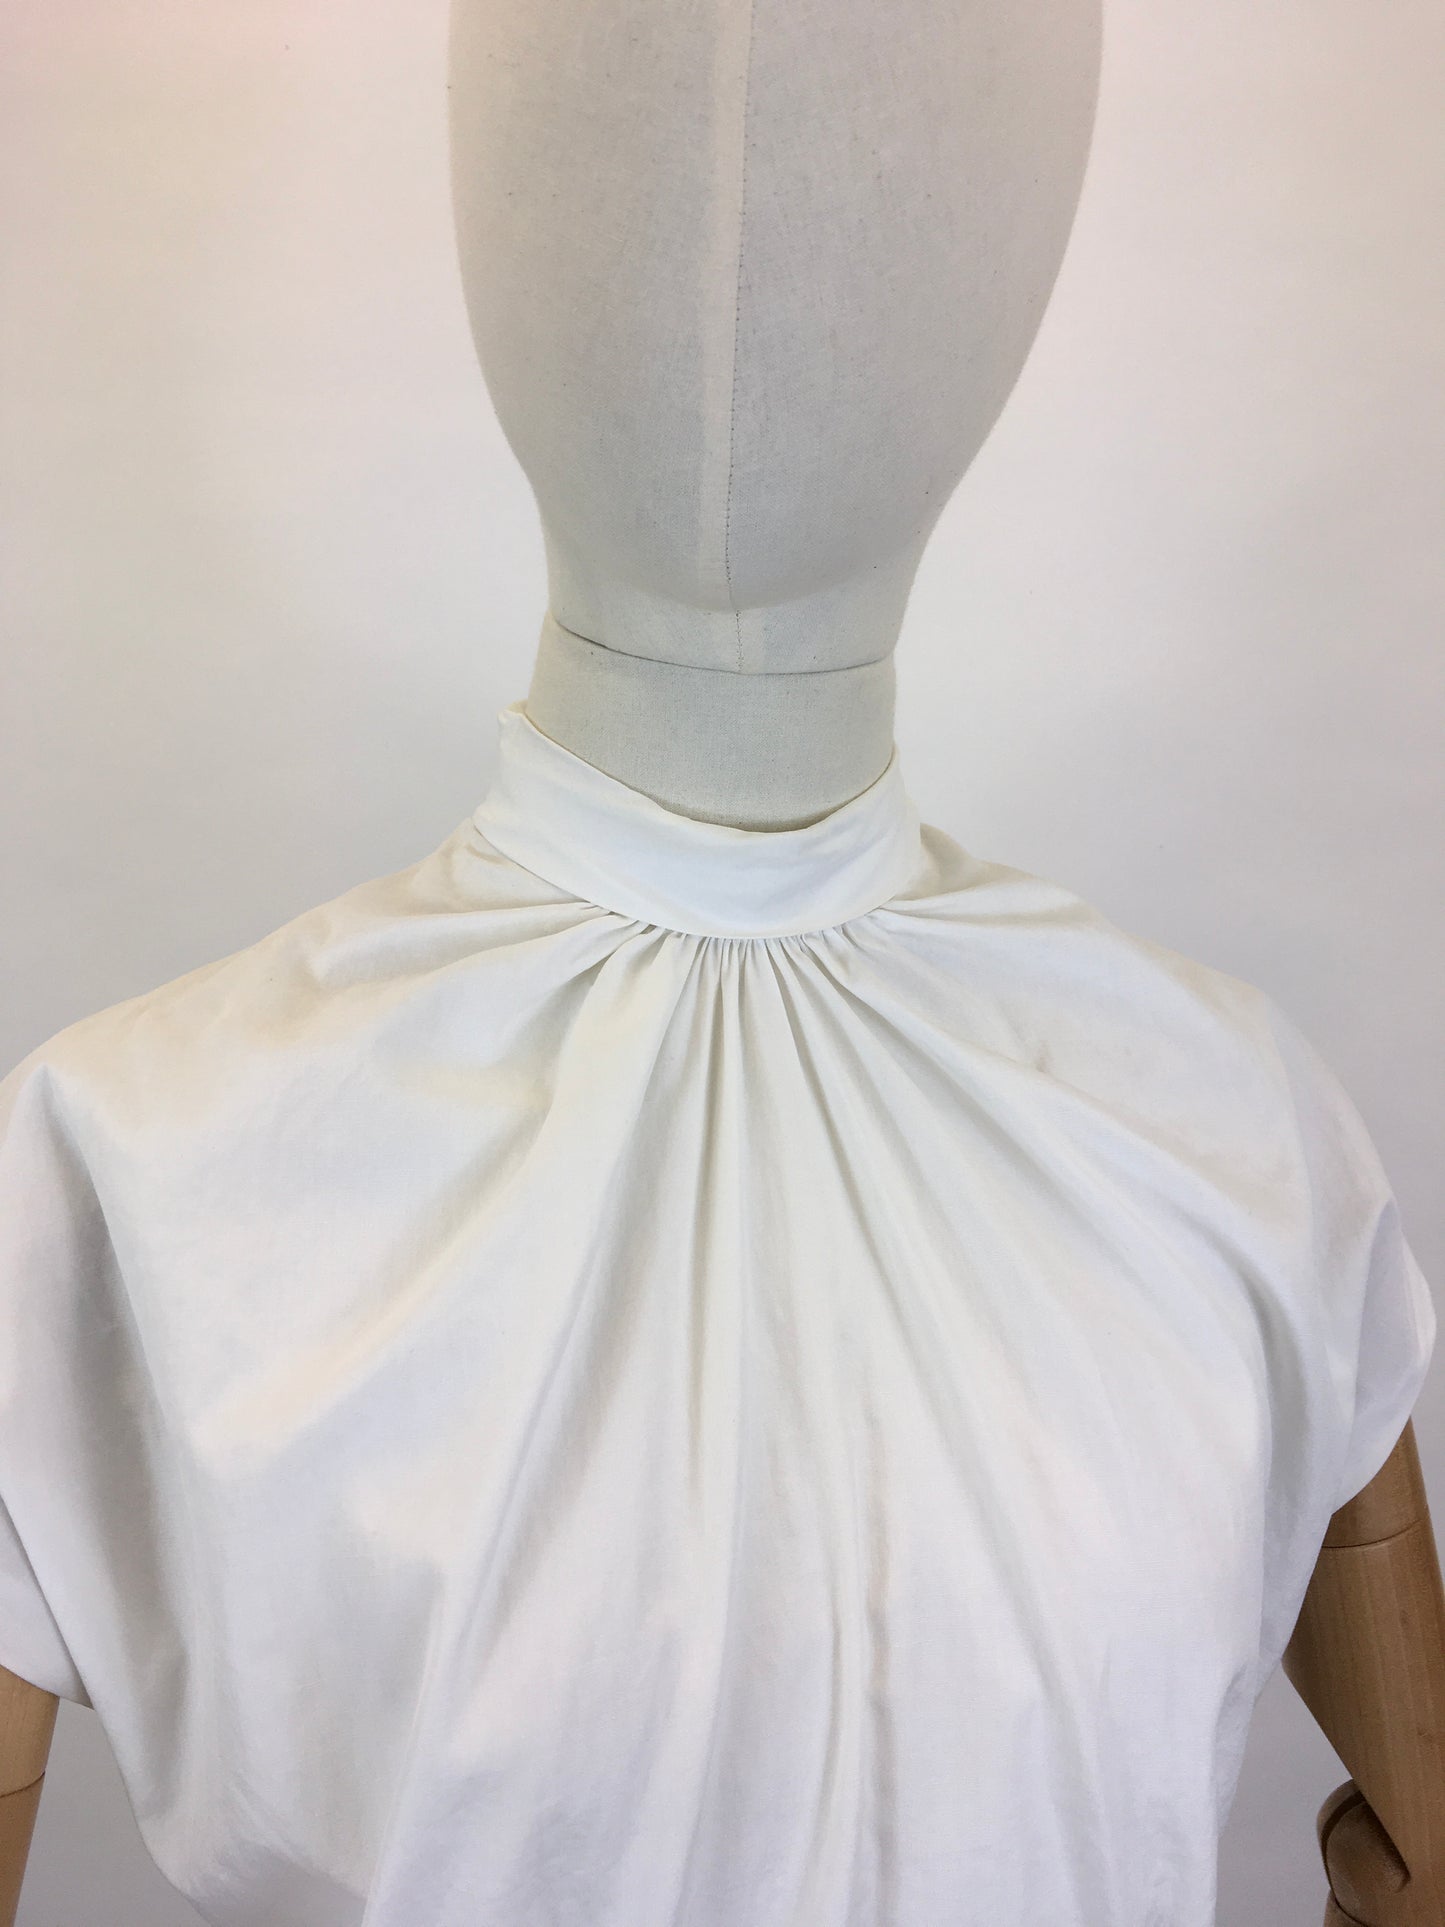 Original 1950’s High Neck Blouse - Made From A Crisp White Cotton